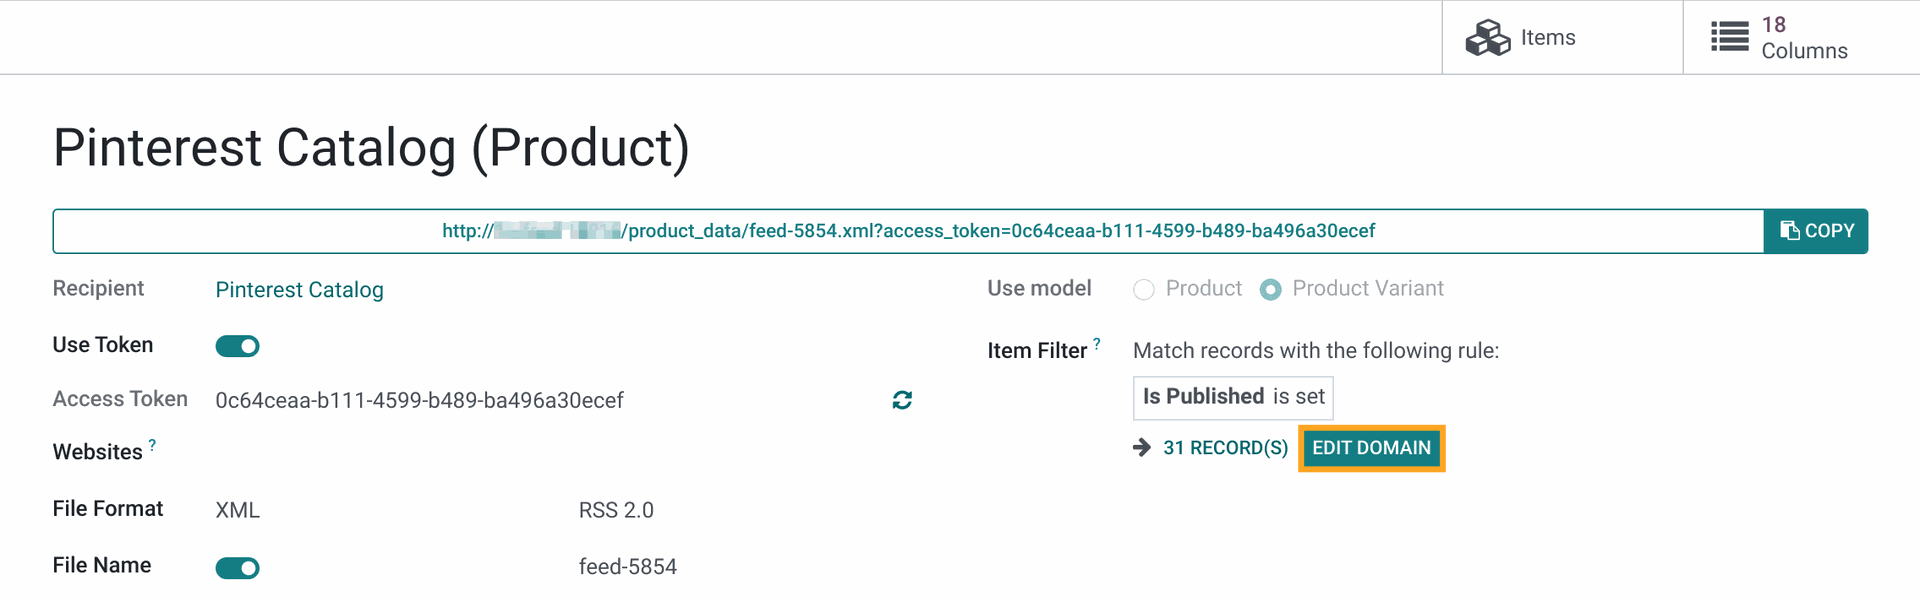 Odoo Pinterest Catalogs product filter 16.0